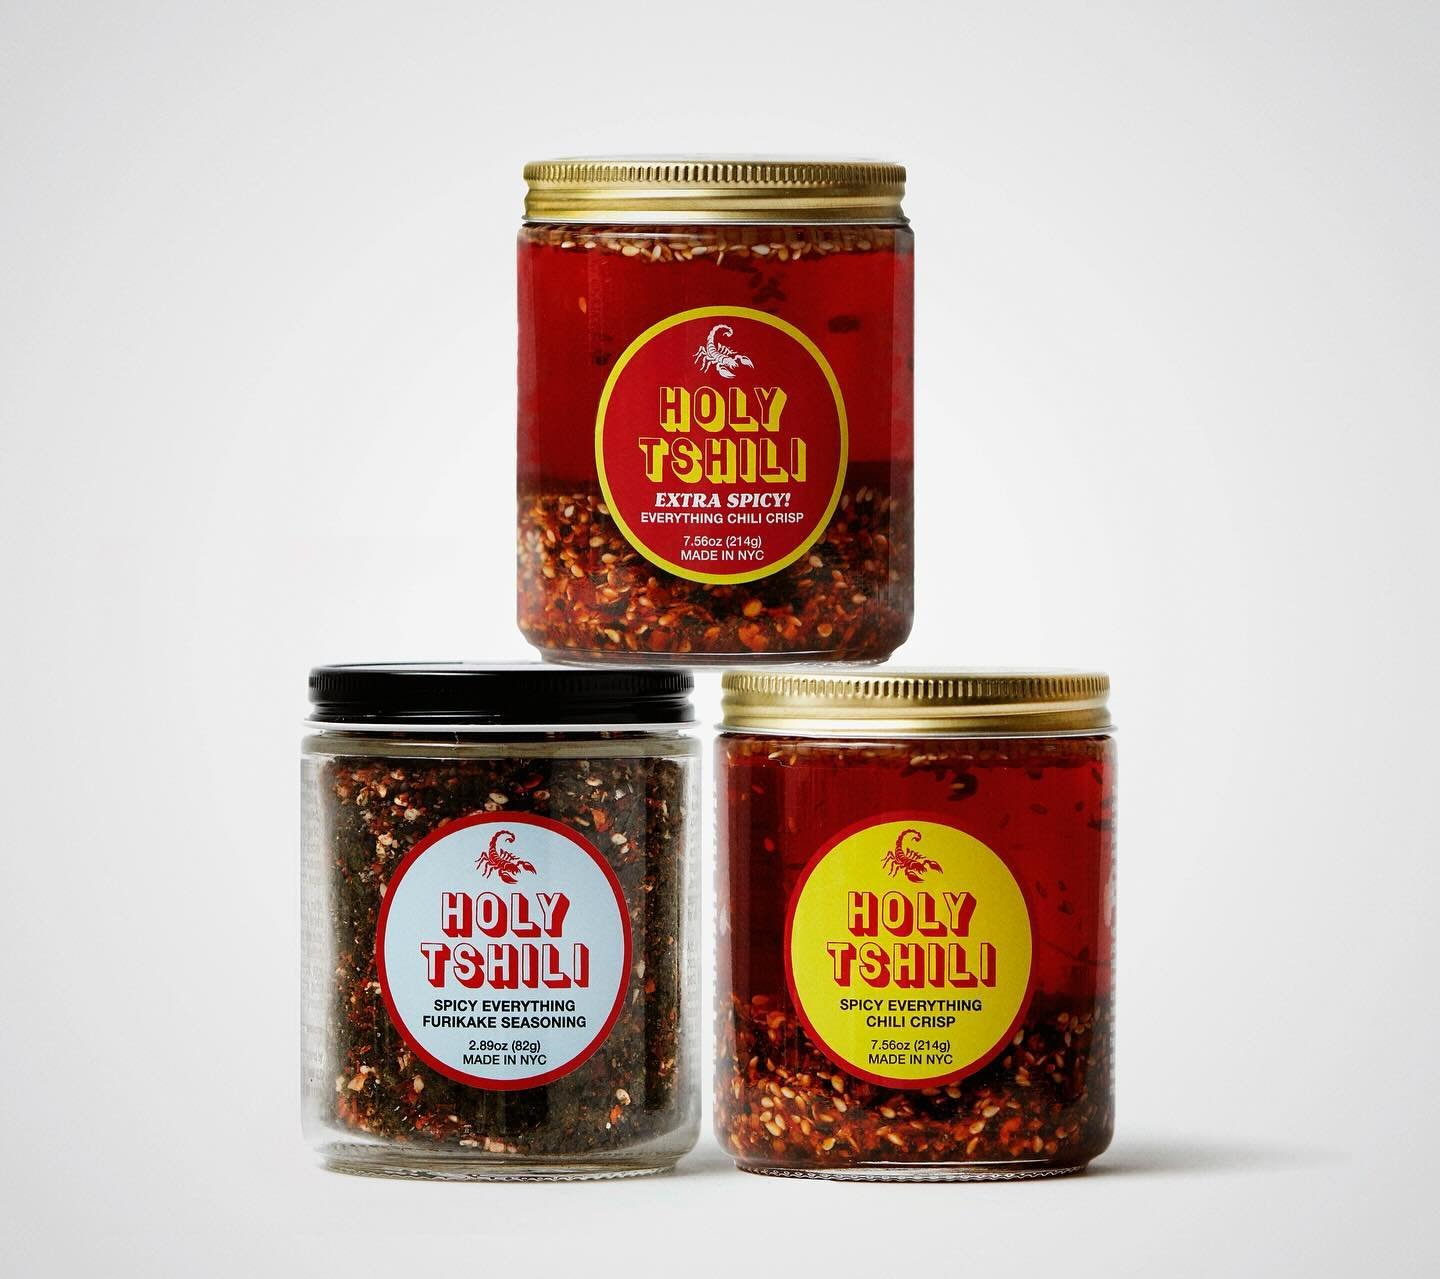 Producer feature for our upcoming 5/13 industry night on Monday :)

@holytshili is a small-batch, woman-owned, Born-in-NY, condiment brand that is the lovechild of savory, toasty everything bagel seeds and fiery Sichuan chilis in a unique collection 